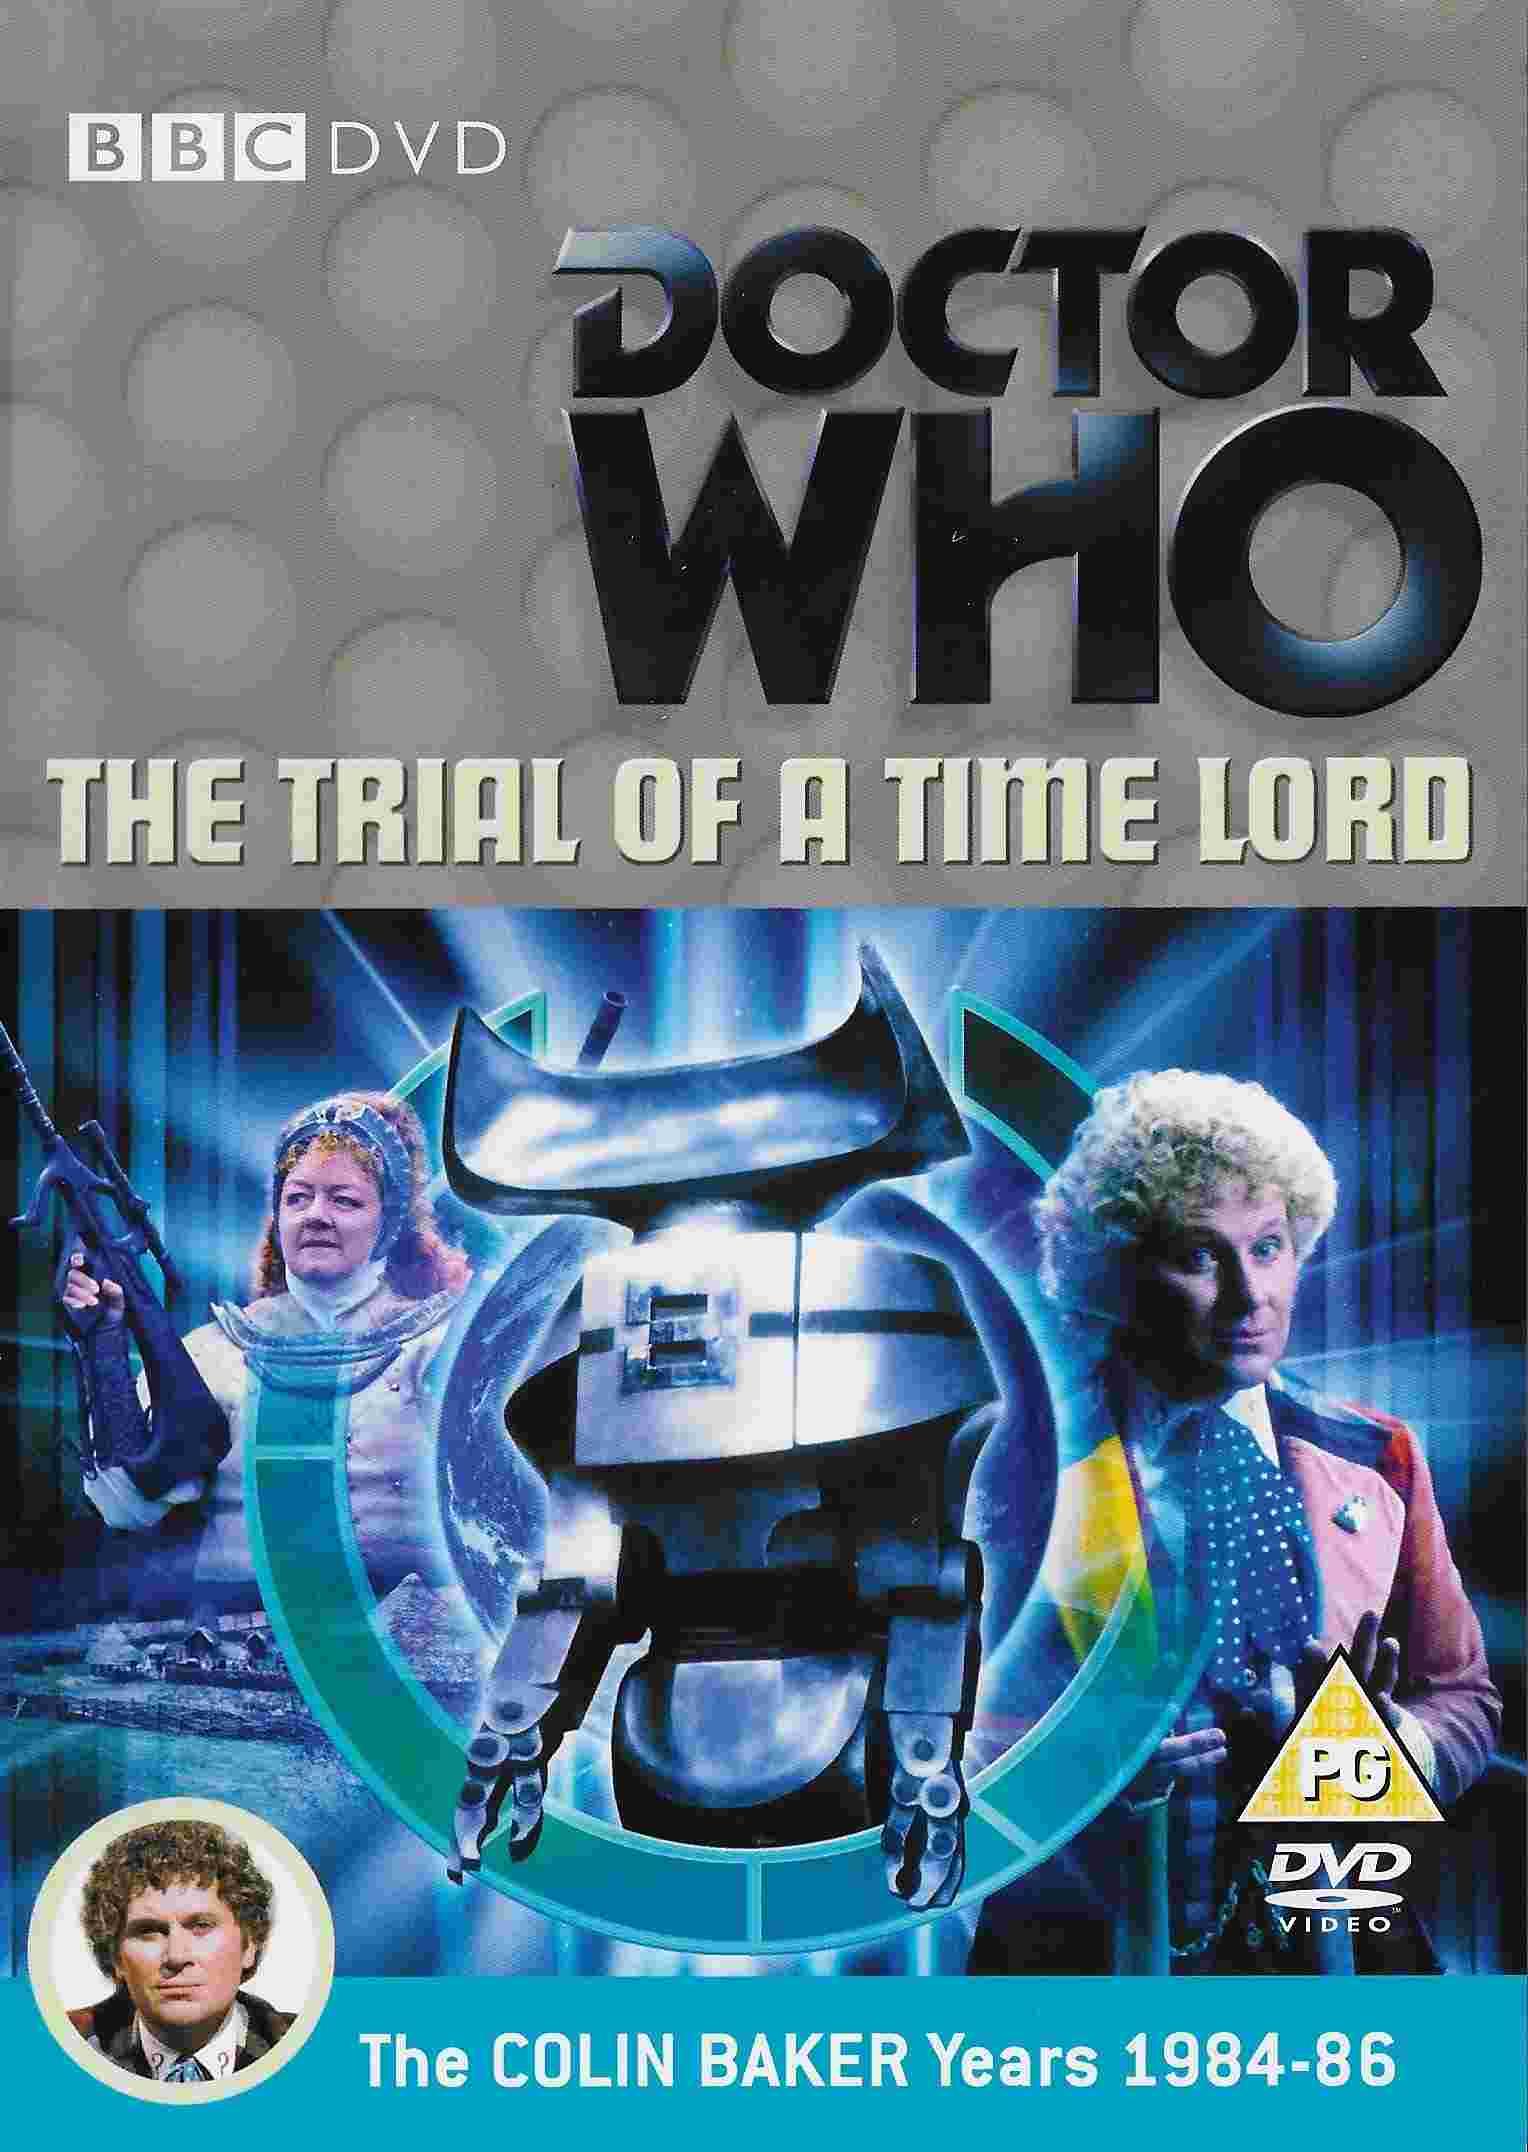 Picture of BBCDVD 2422A Doctor Who - The trial of a Time Lord - Parts 1-4 - The mysterious planet by artist Robert Holmes from the BBC dvds - Records and Tapes library